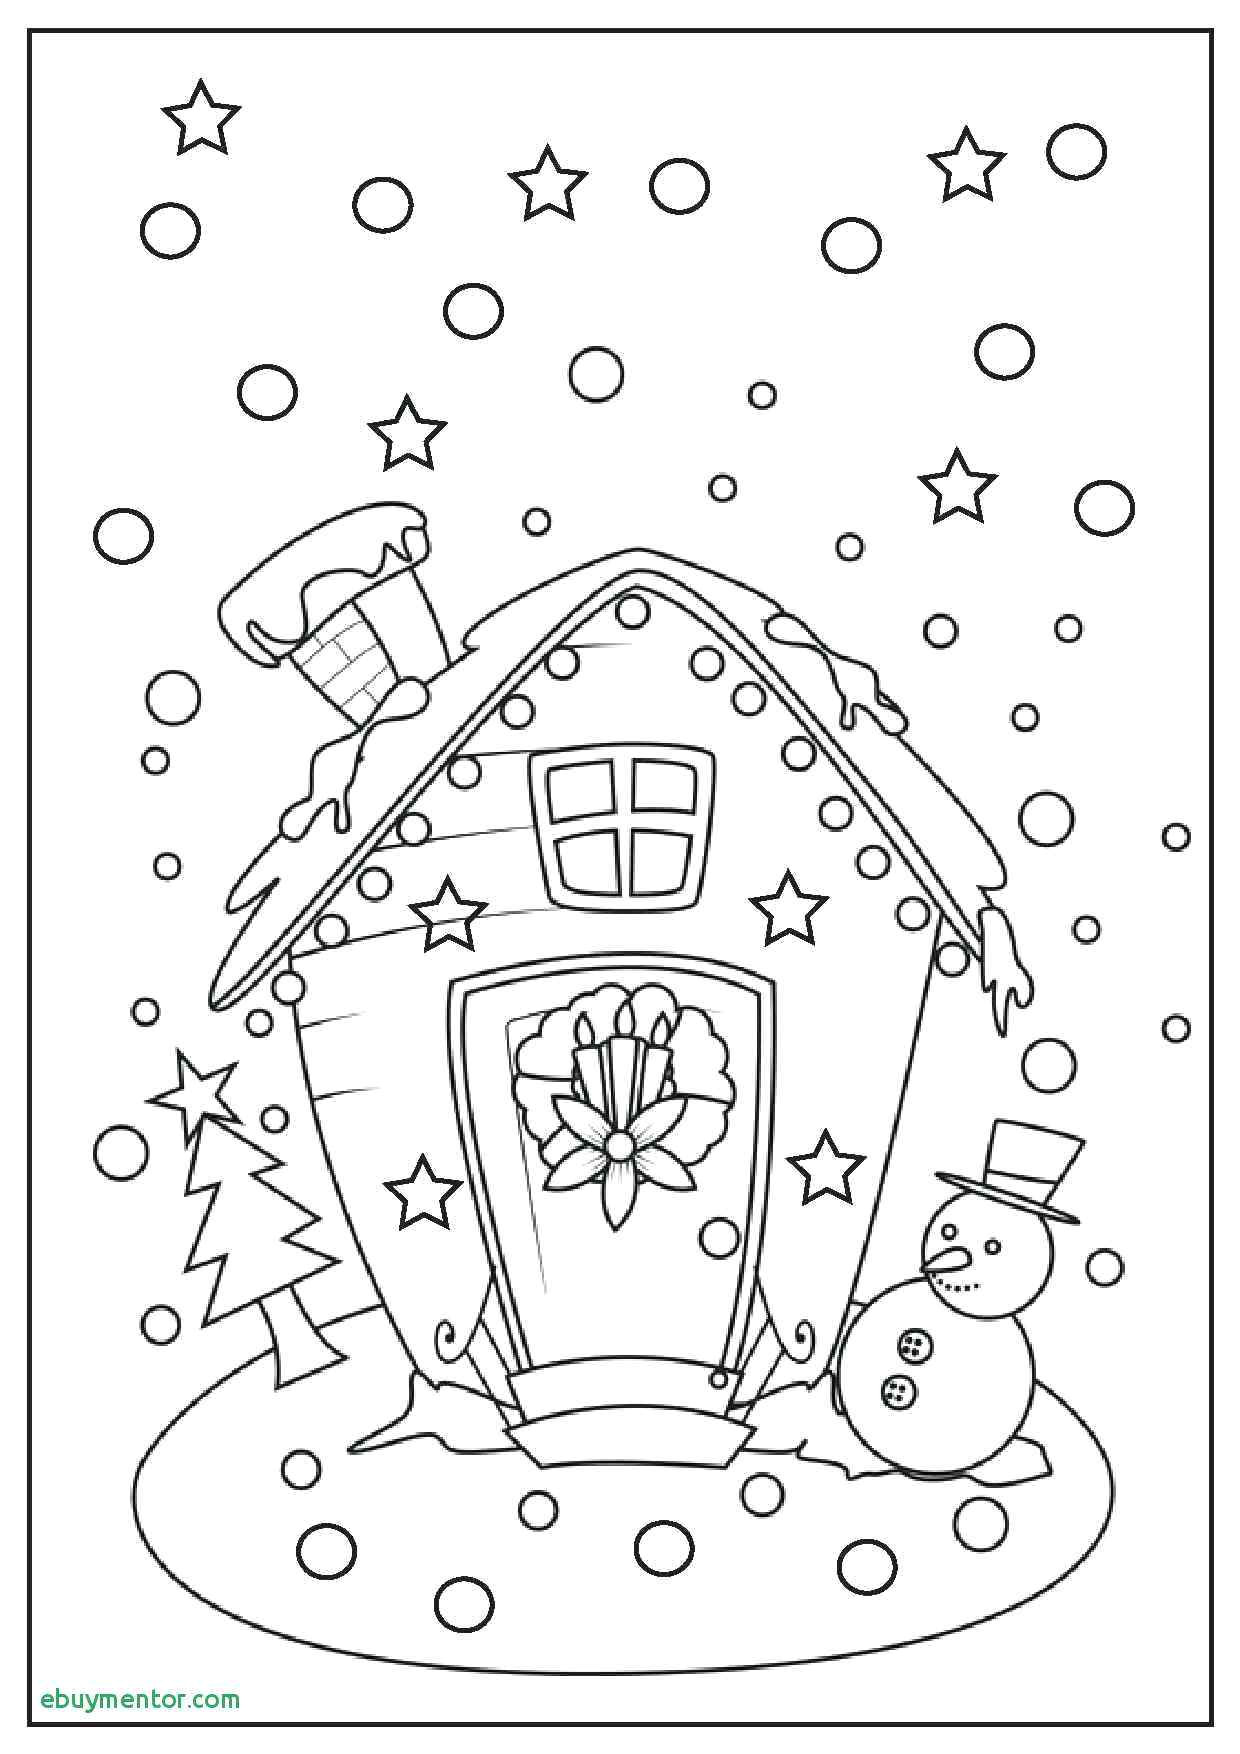 Drawing Xmas Decorations Christmas Decorations for Kids to Color Luxury Cool Coloring Page